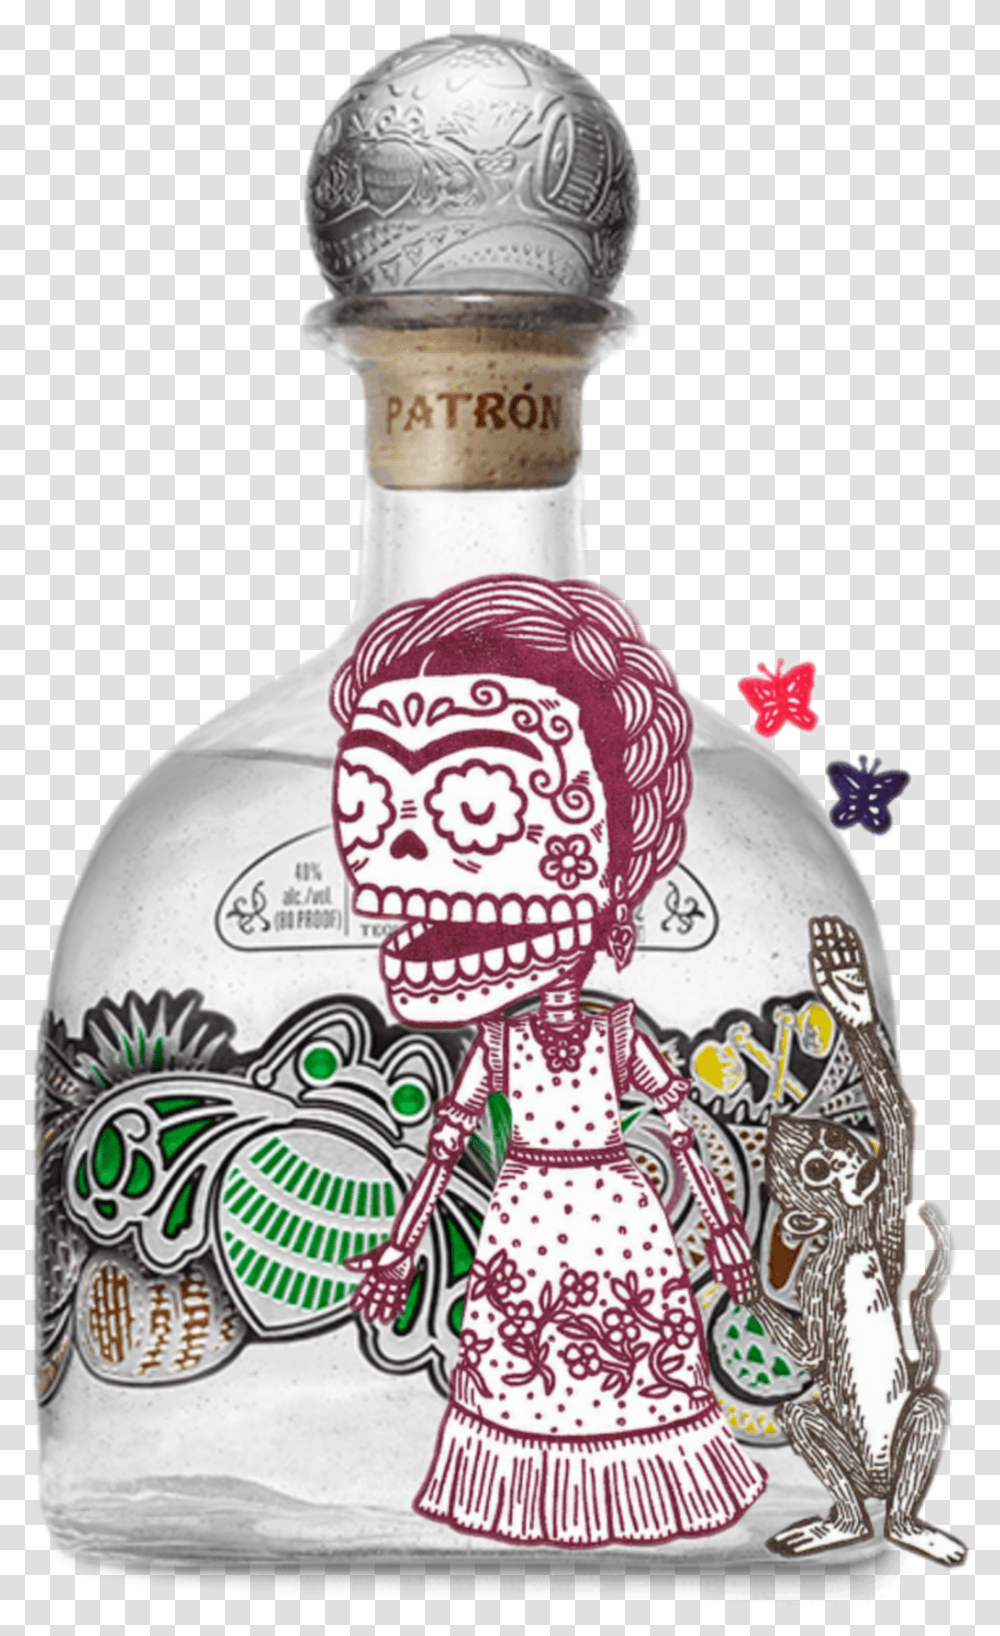 Scbottle Bottle Tequila Mexico Patrn Patron Silver Limited Tequila, Doodle, Drawing, Alcohol Transparent Png